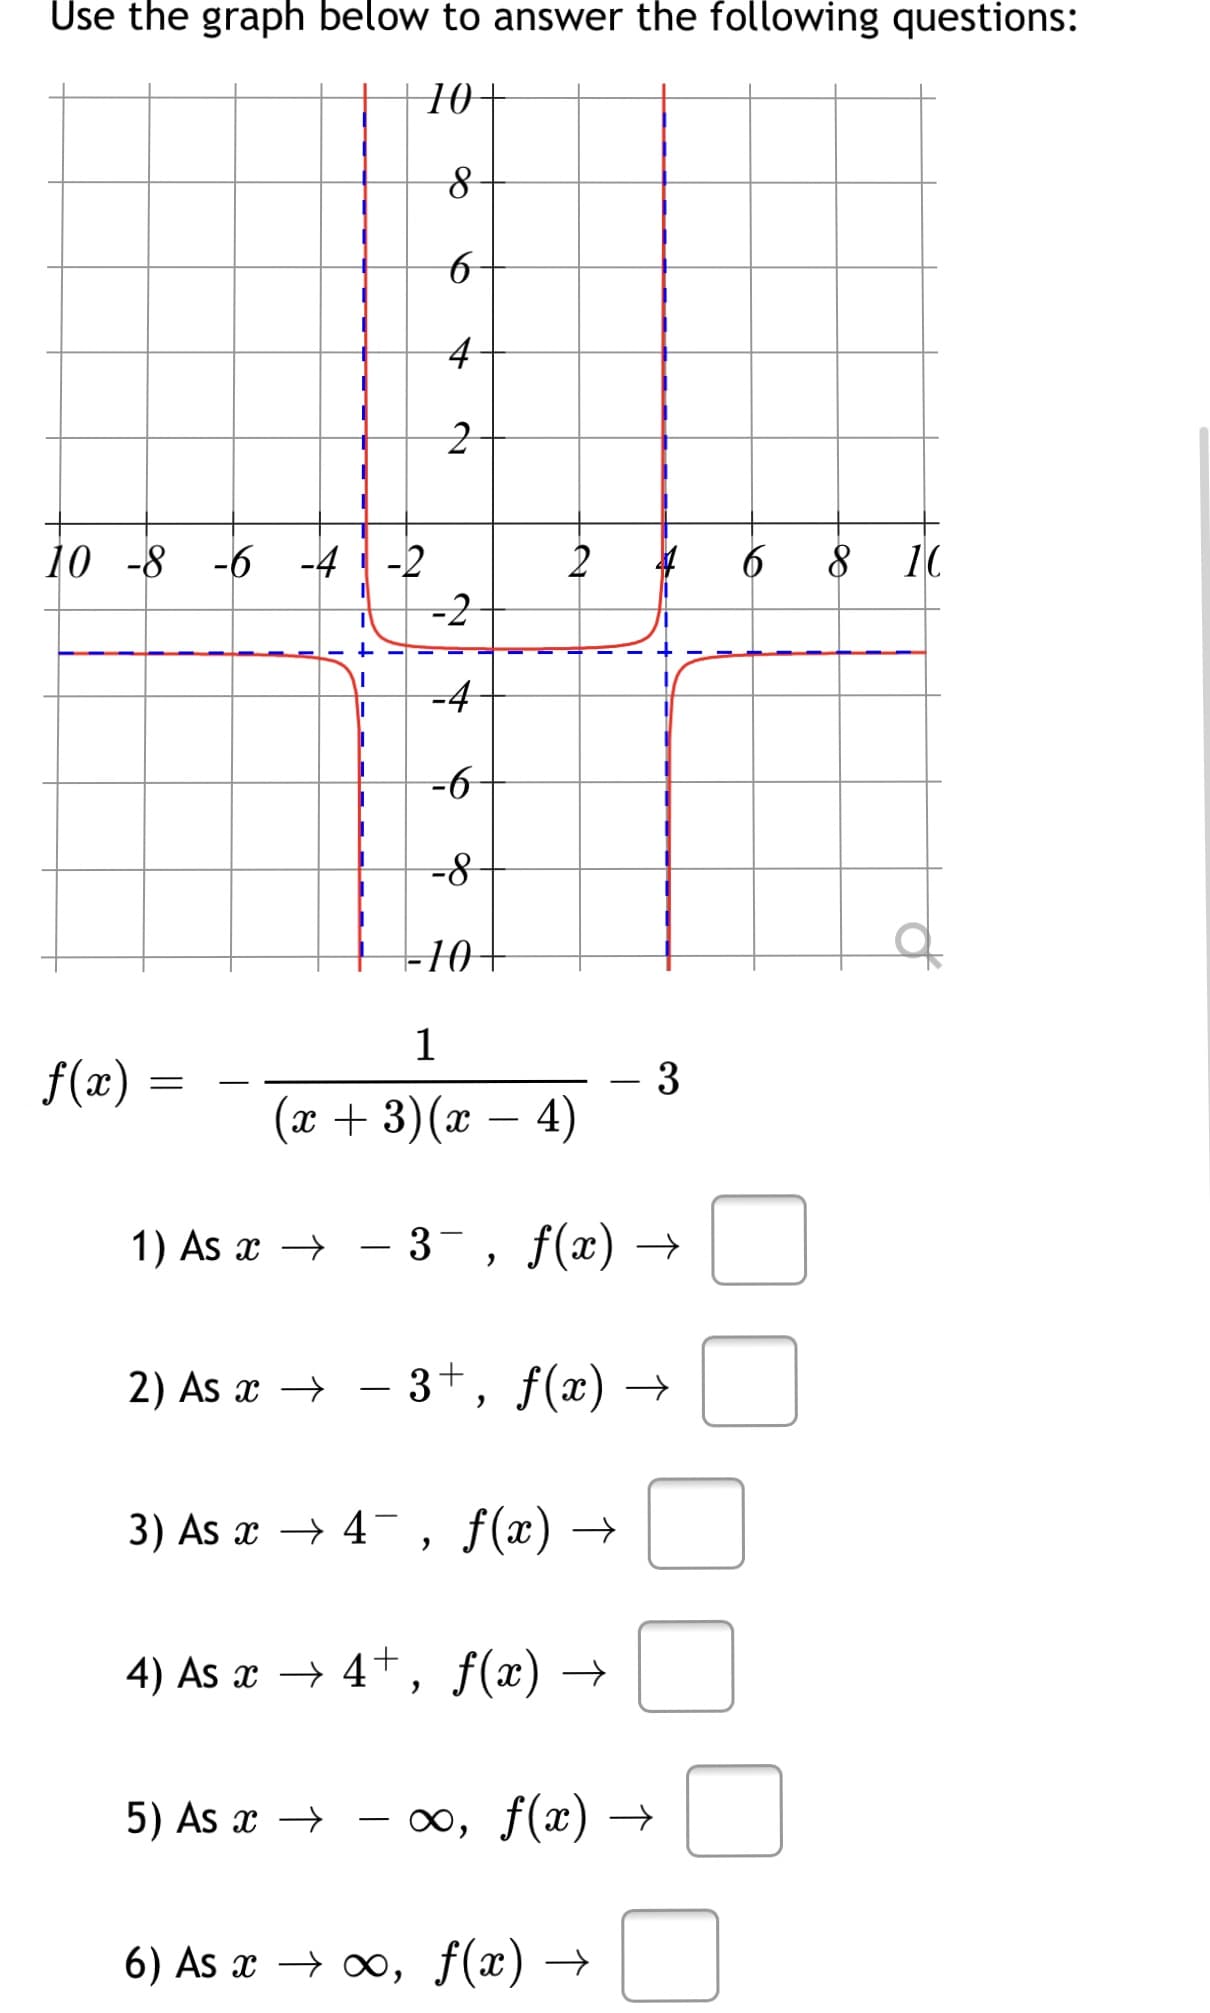 Use the graph below to answer the following questions:
10+
4
10 -8
-6 -4
2
6
8 10
-2
-4
-6
-10
10+
1
f(x)
3
(и + 3)(ӕ — 4)
-
1) As x →
- 3-, f(x) →
-
2) As x → -
3+, f(x) →
3) As x → 4 , f(x) →
